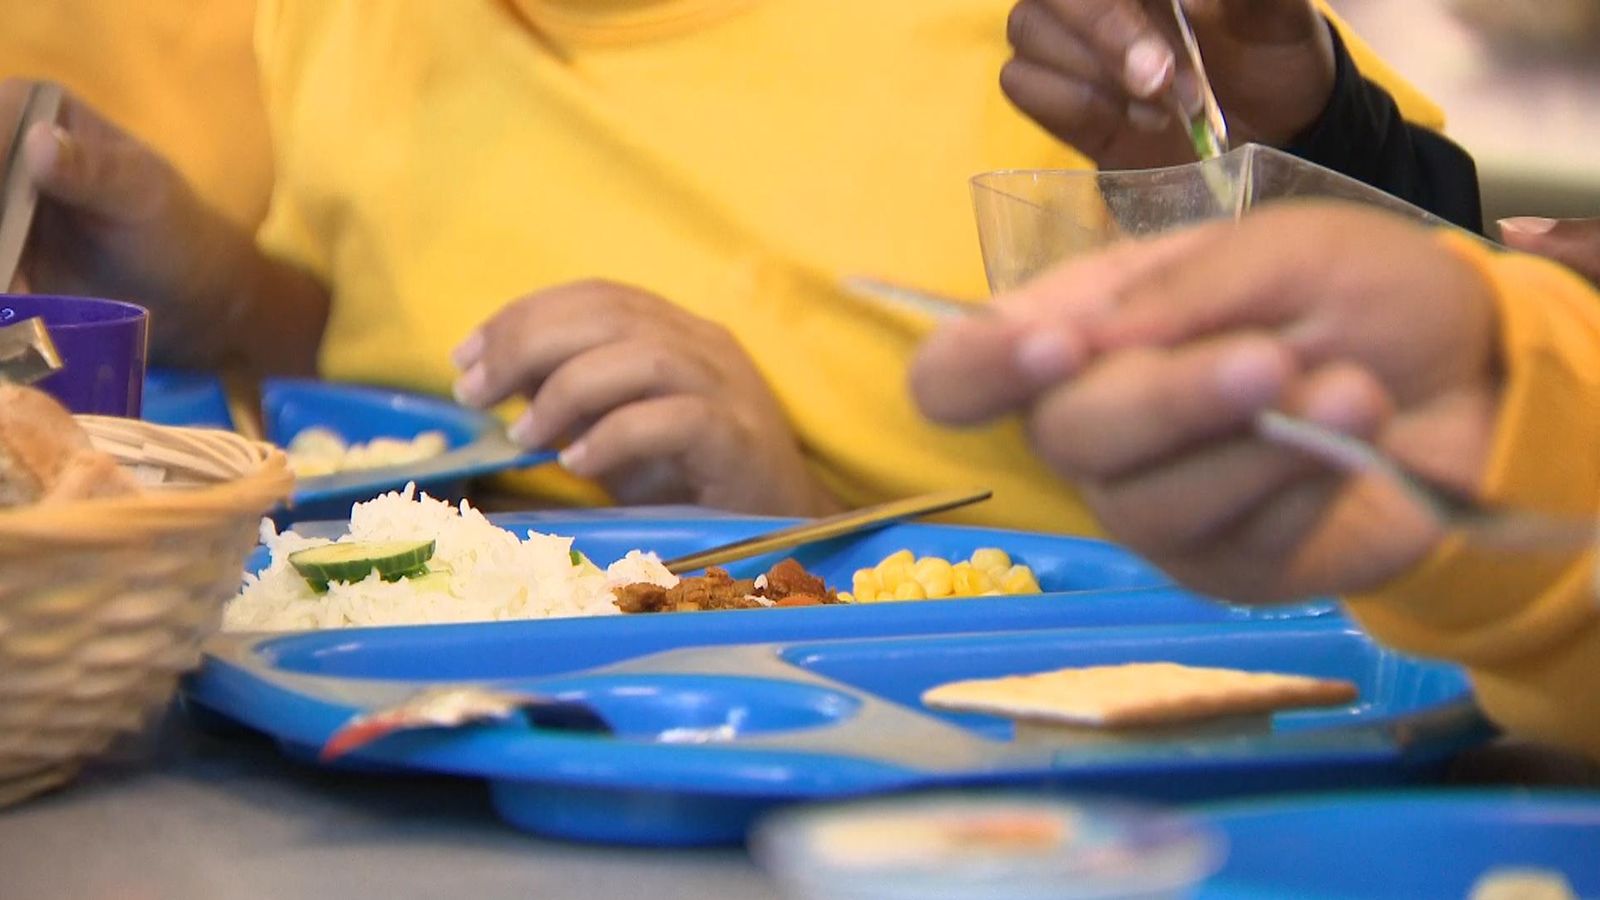 Cost of living crisis: 1.8 million children facing poorer quality school meals as food costs rise 